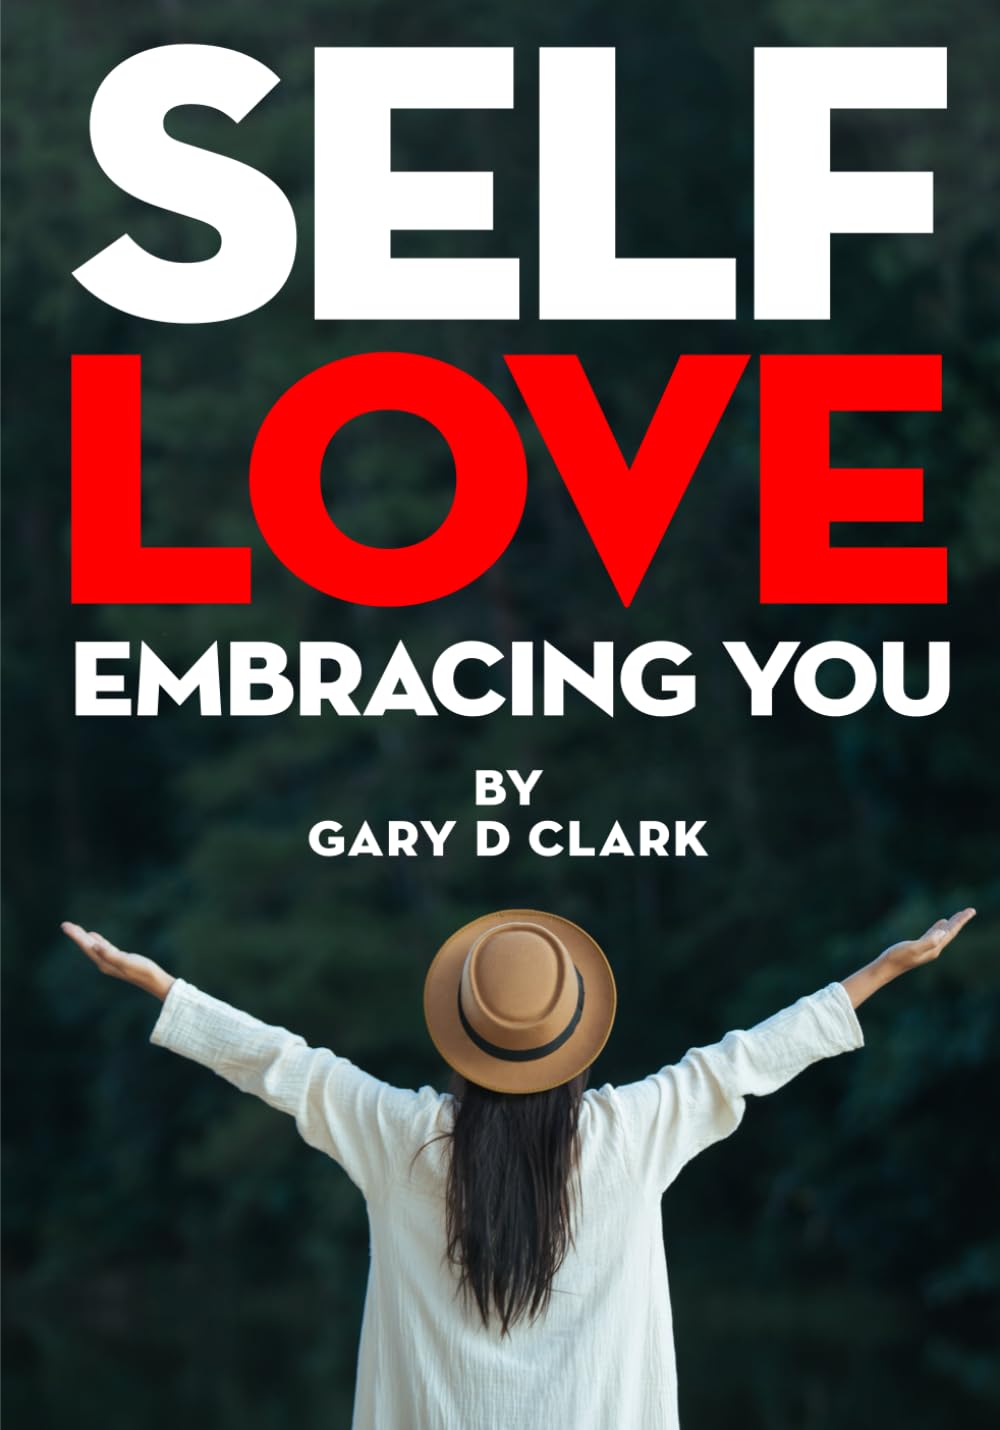 A Journey To Self-Love - A Transformative Guide by Gary Clark